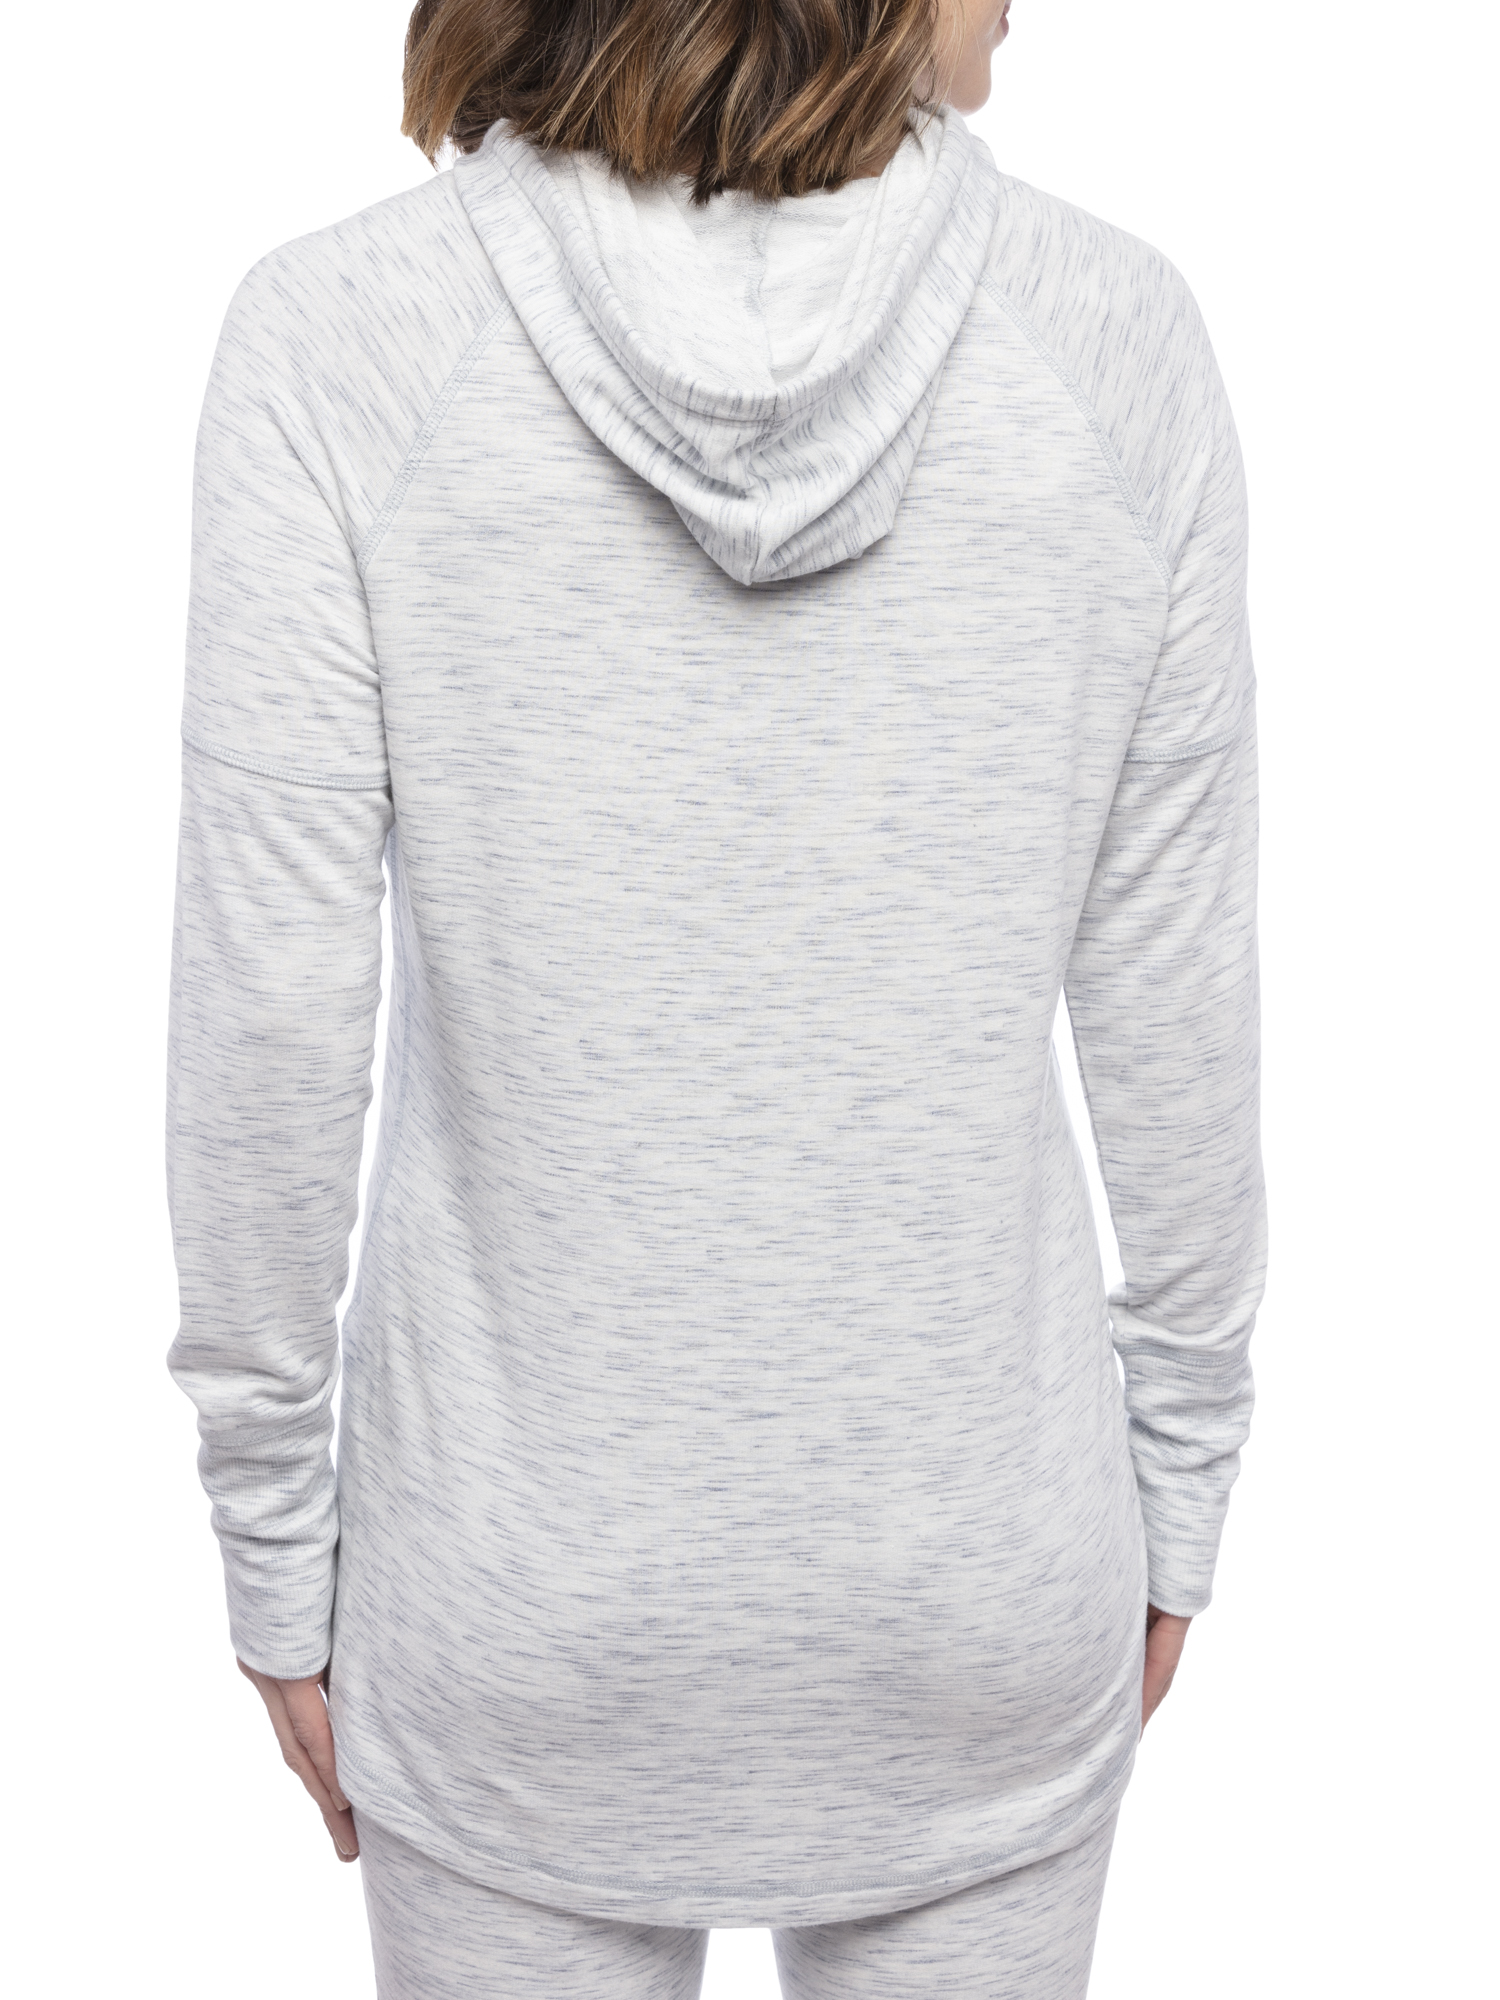 Champion Long Sleeve Stretchy Rayon, Polyester, Spandex Hoodie (Women's) 1 Pack - image 3 of 6